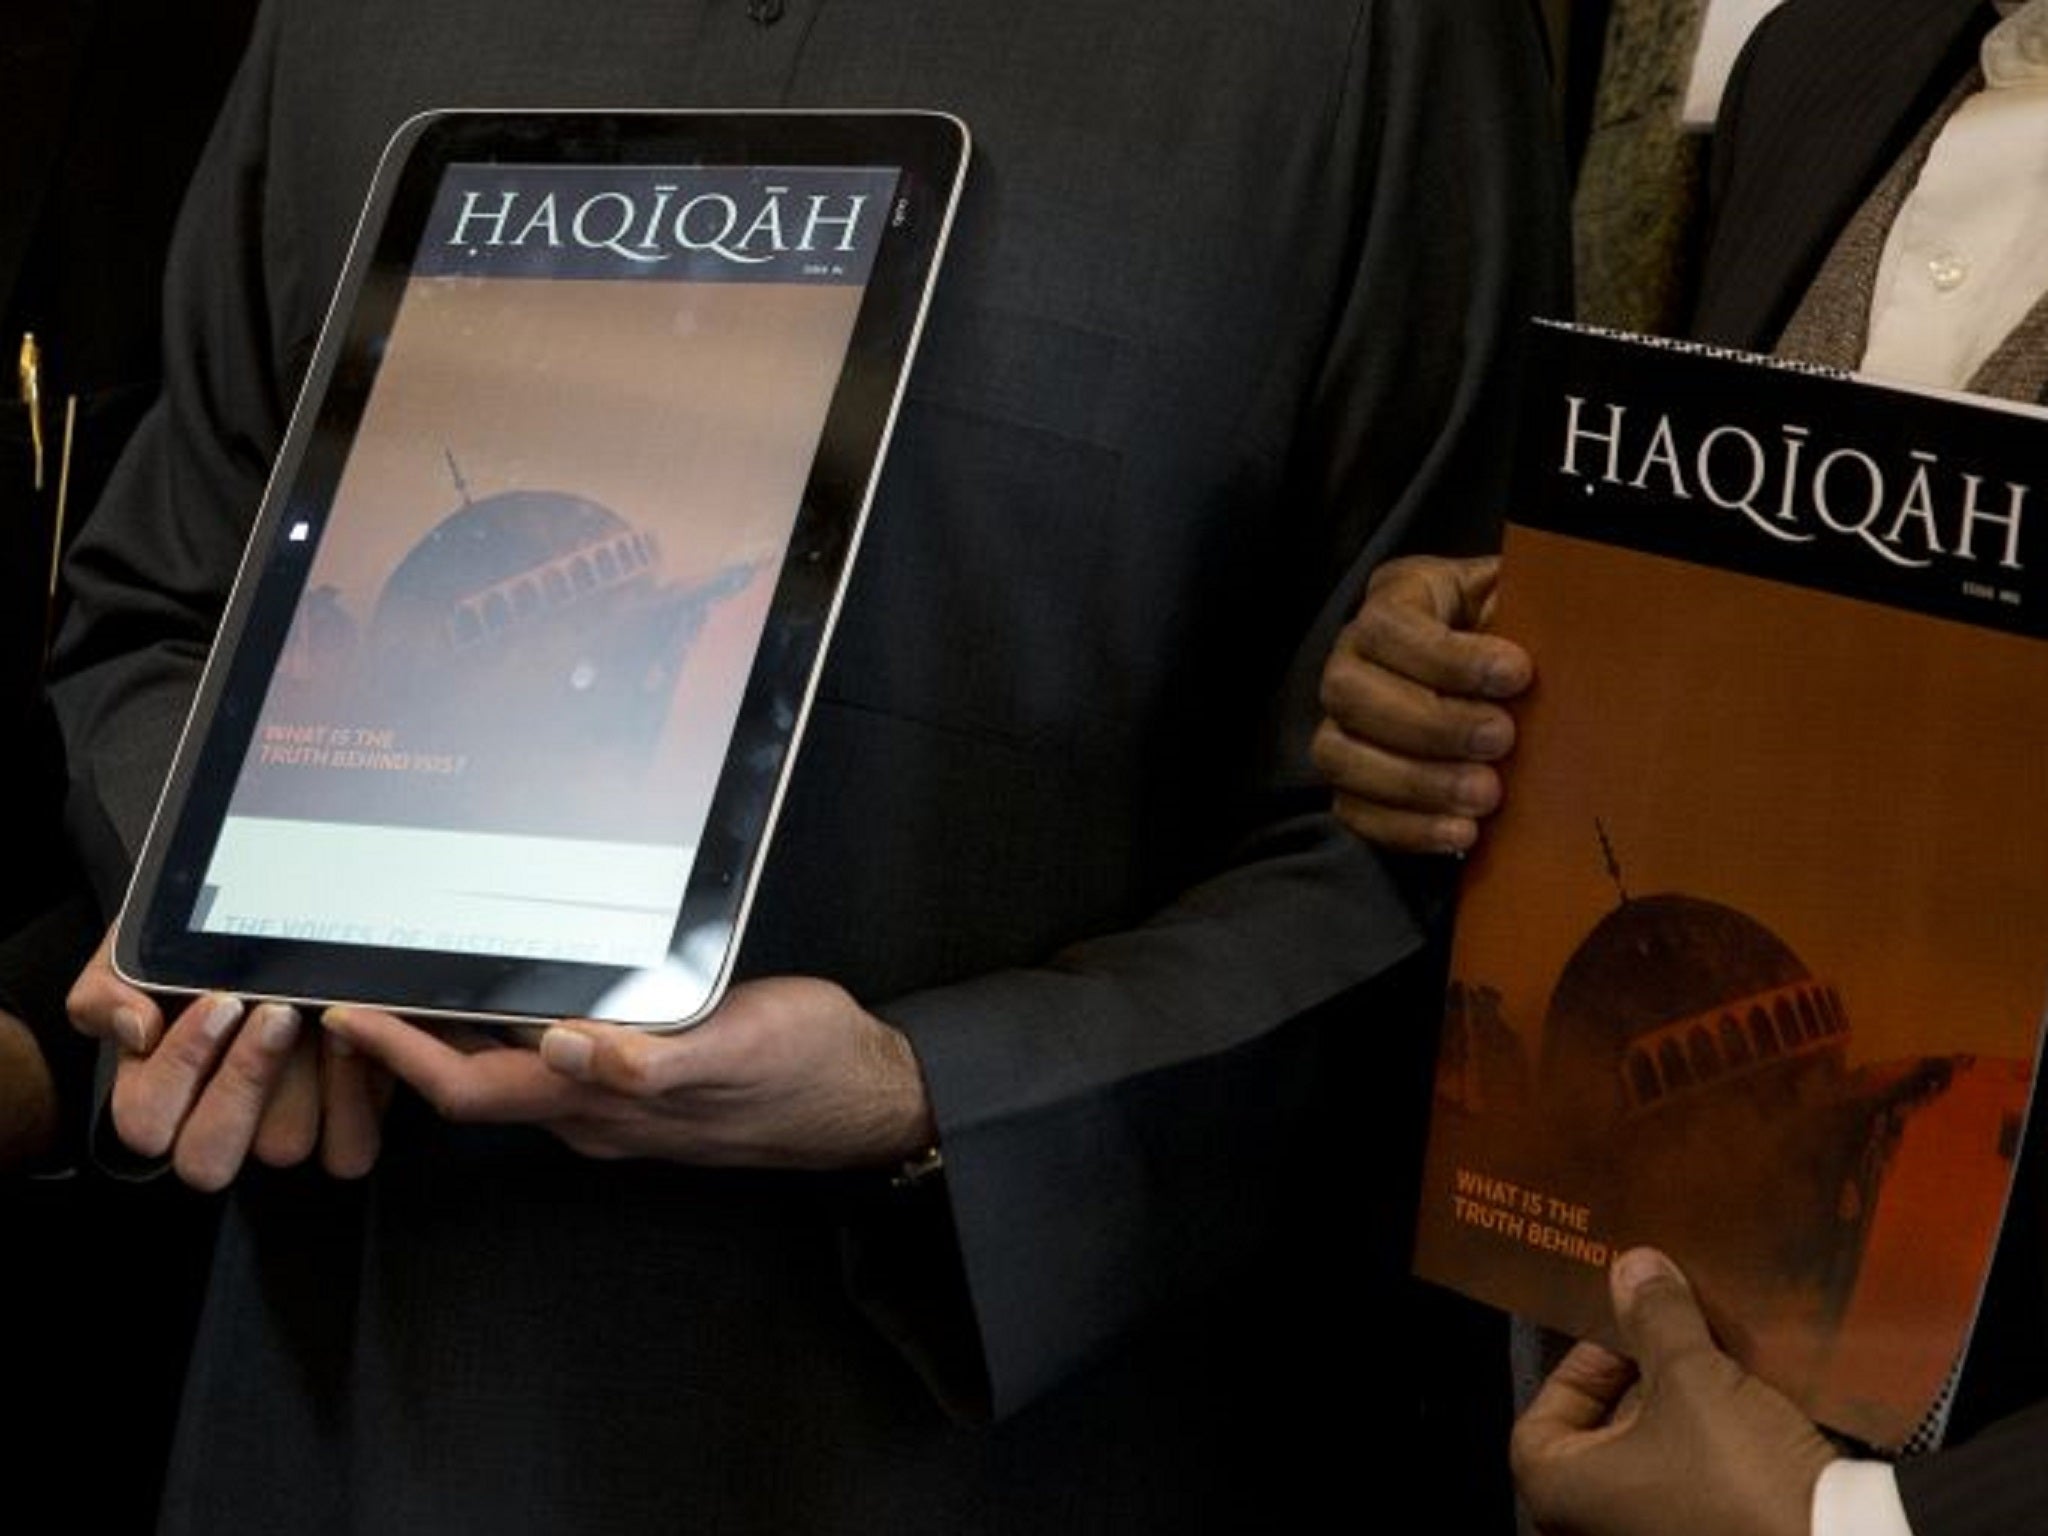 Haqiqah magazine being shown on the iPad and in print during the launch